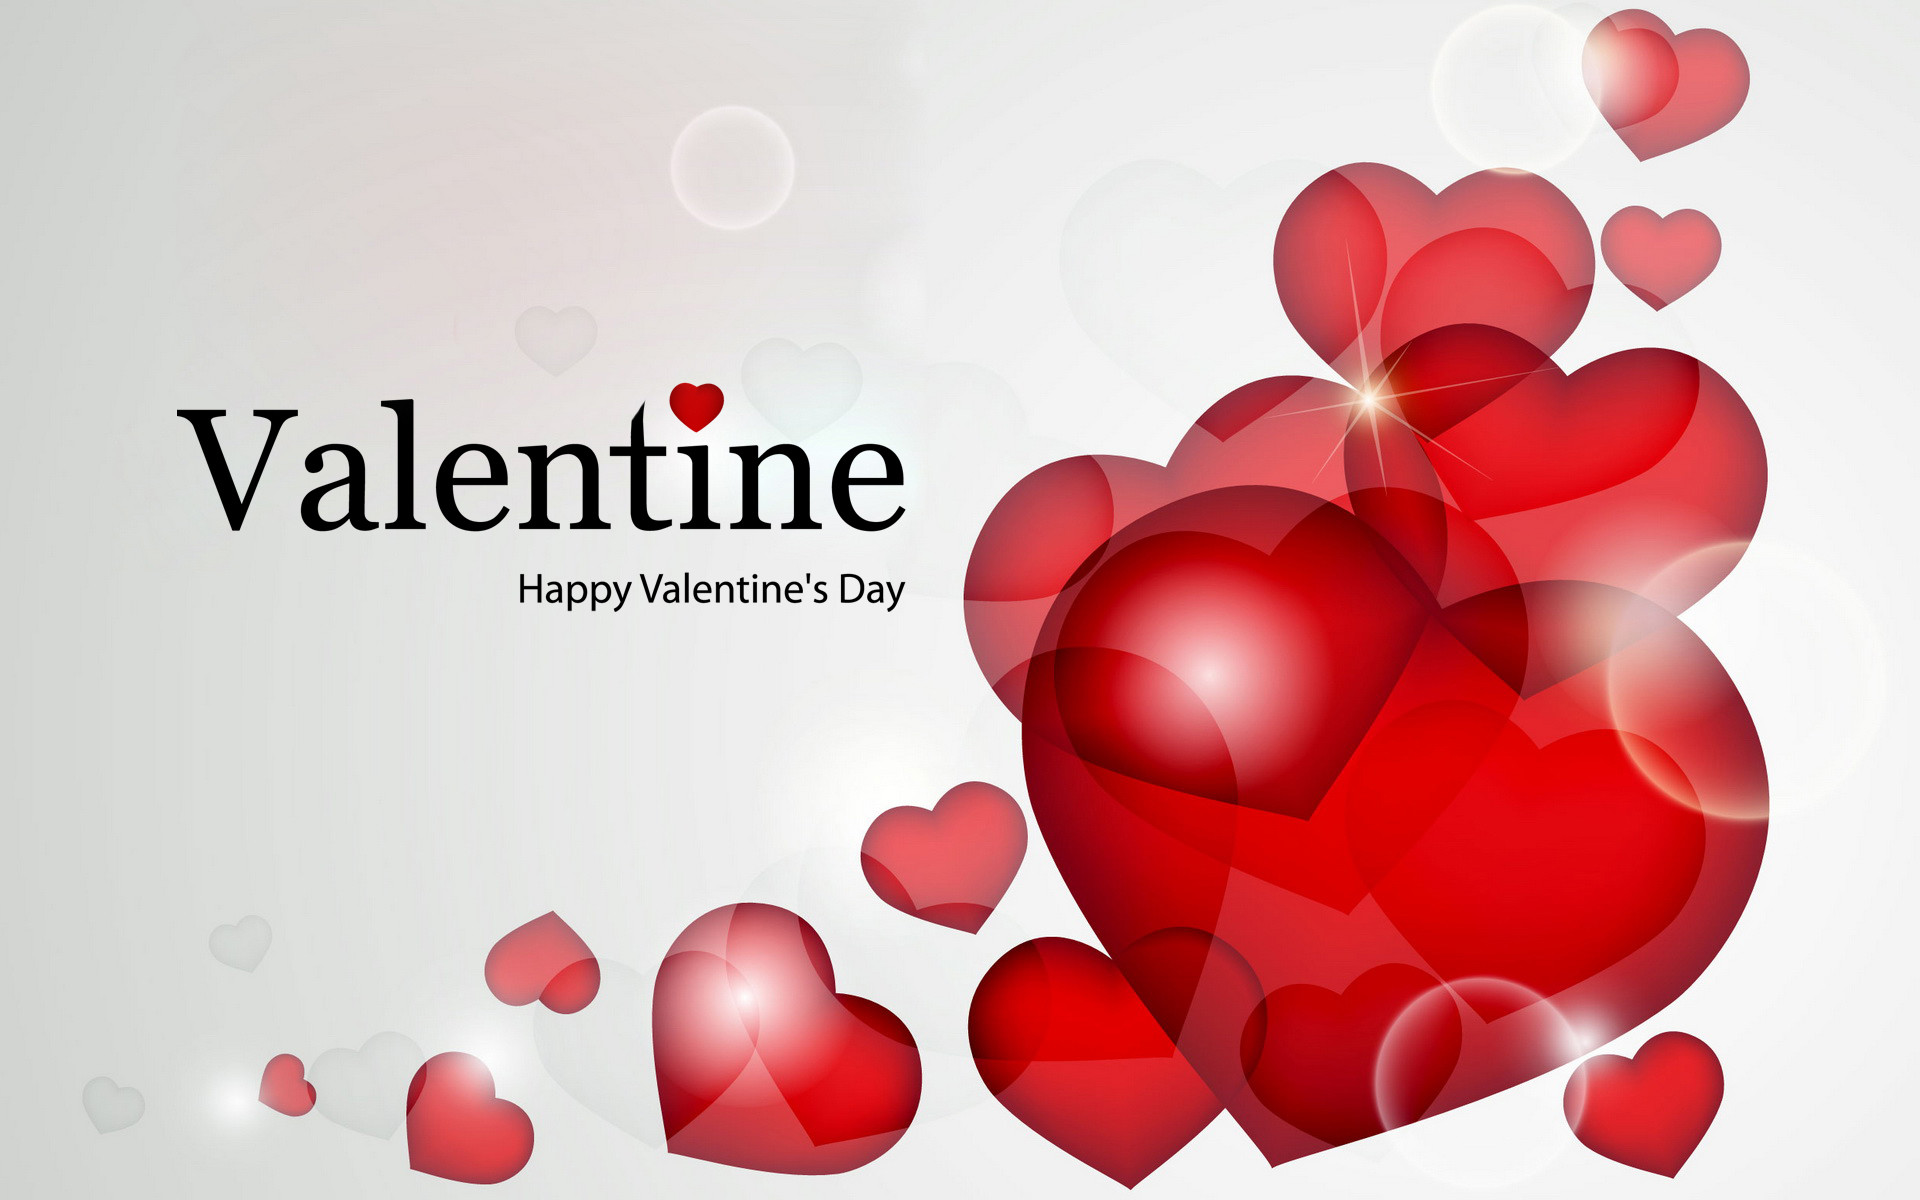 Cute Valentines Day Background Image